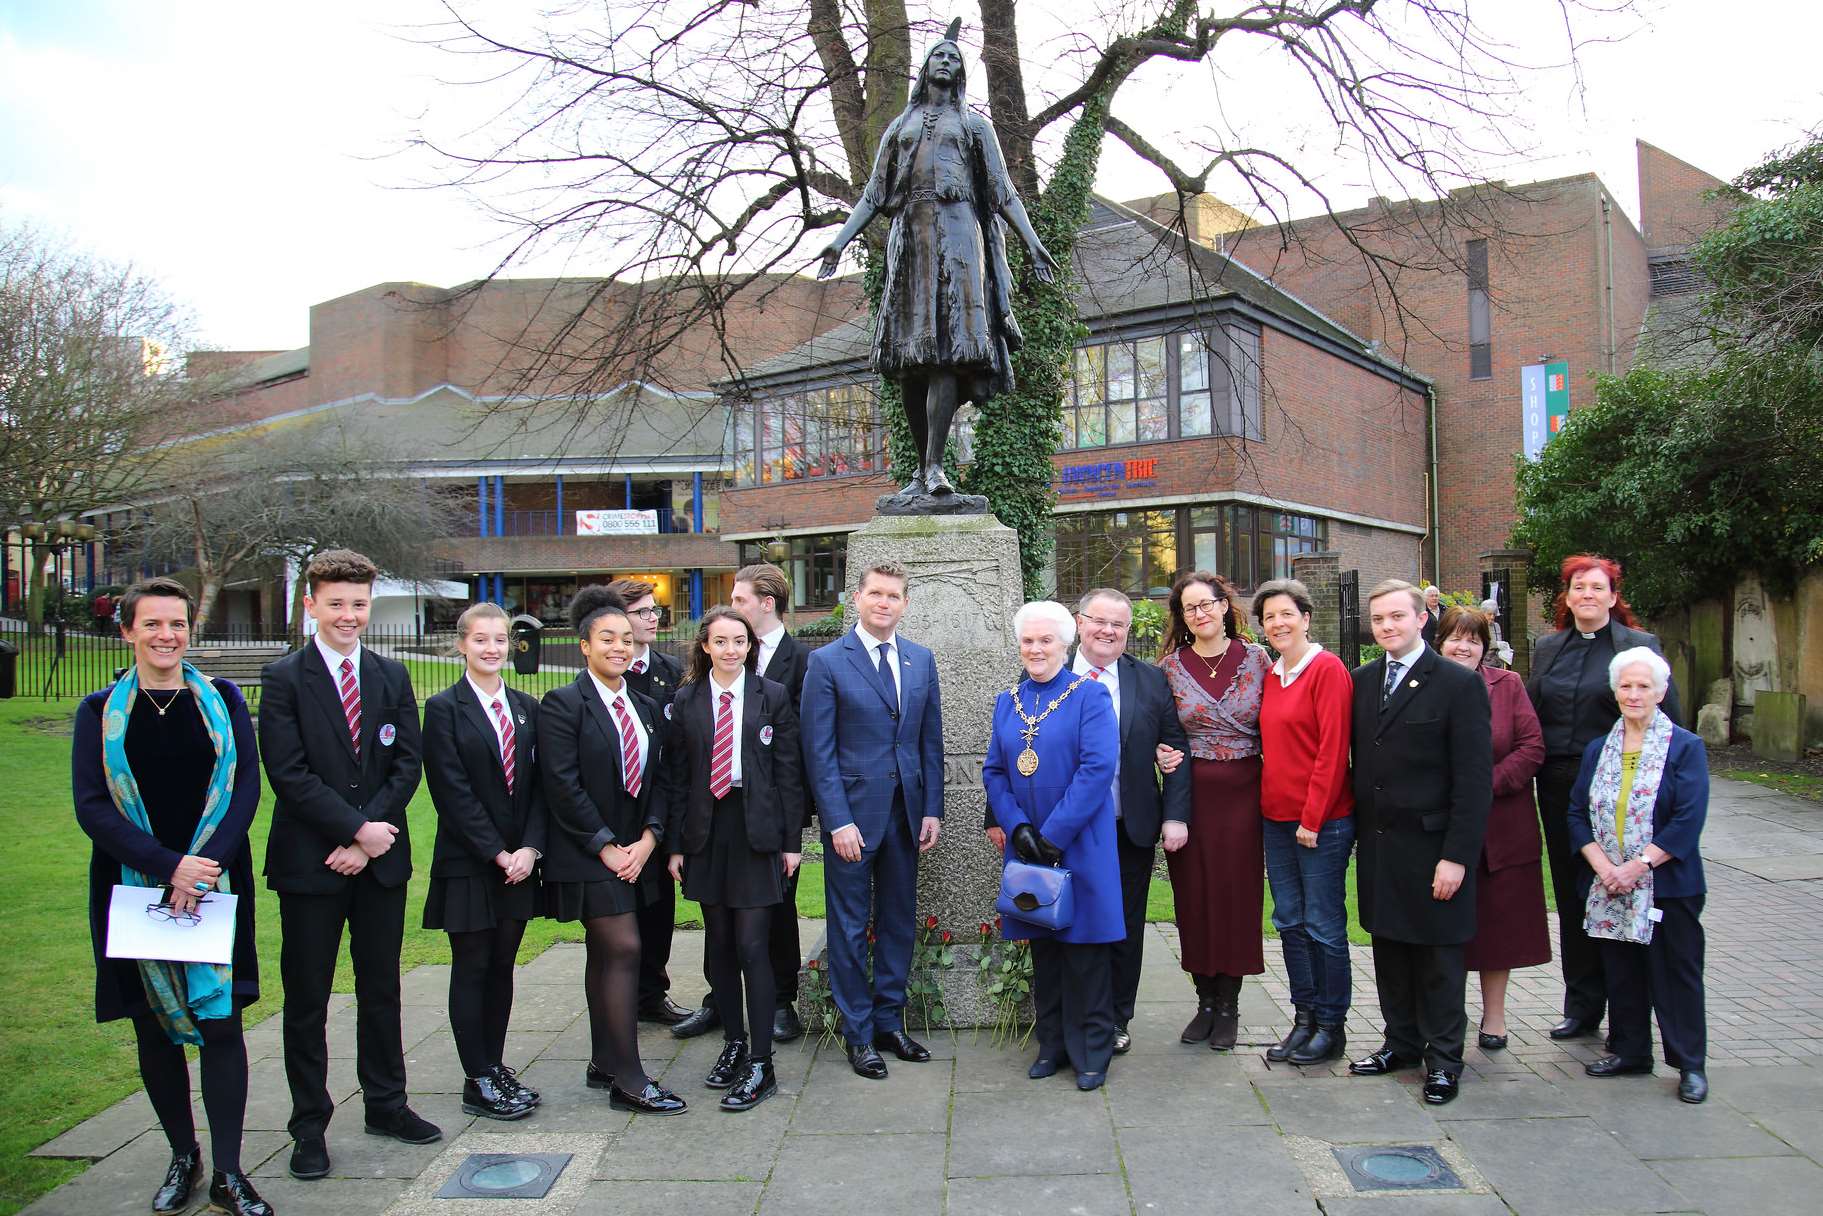 A ceremony was held at St George's Church, where Pocahontas is believed to be buried. Picture: Gravesham council